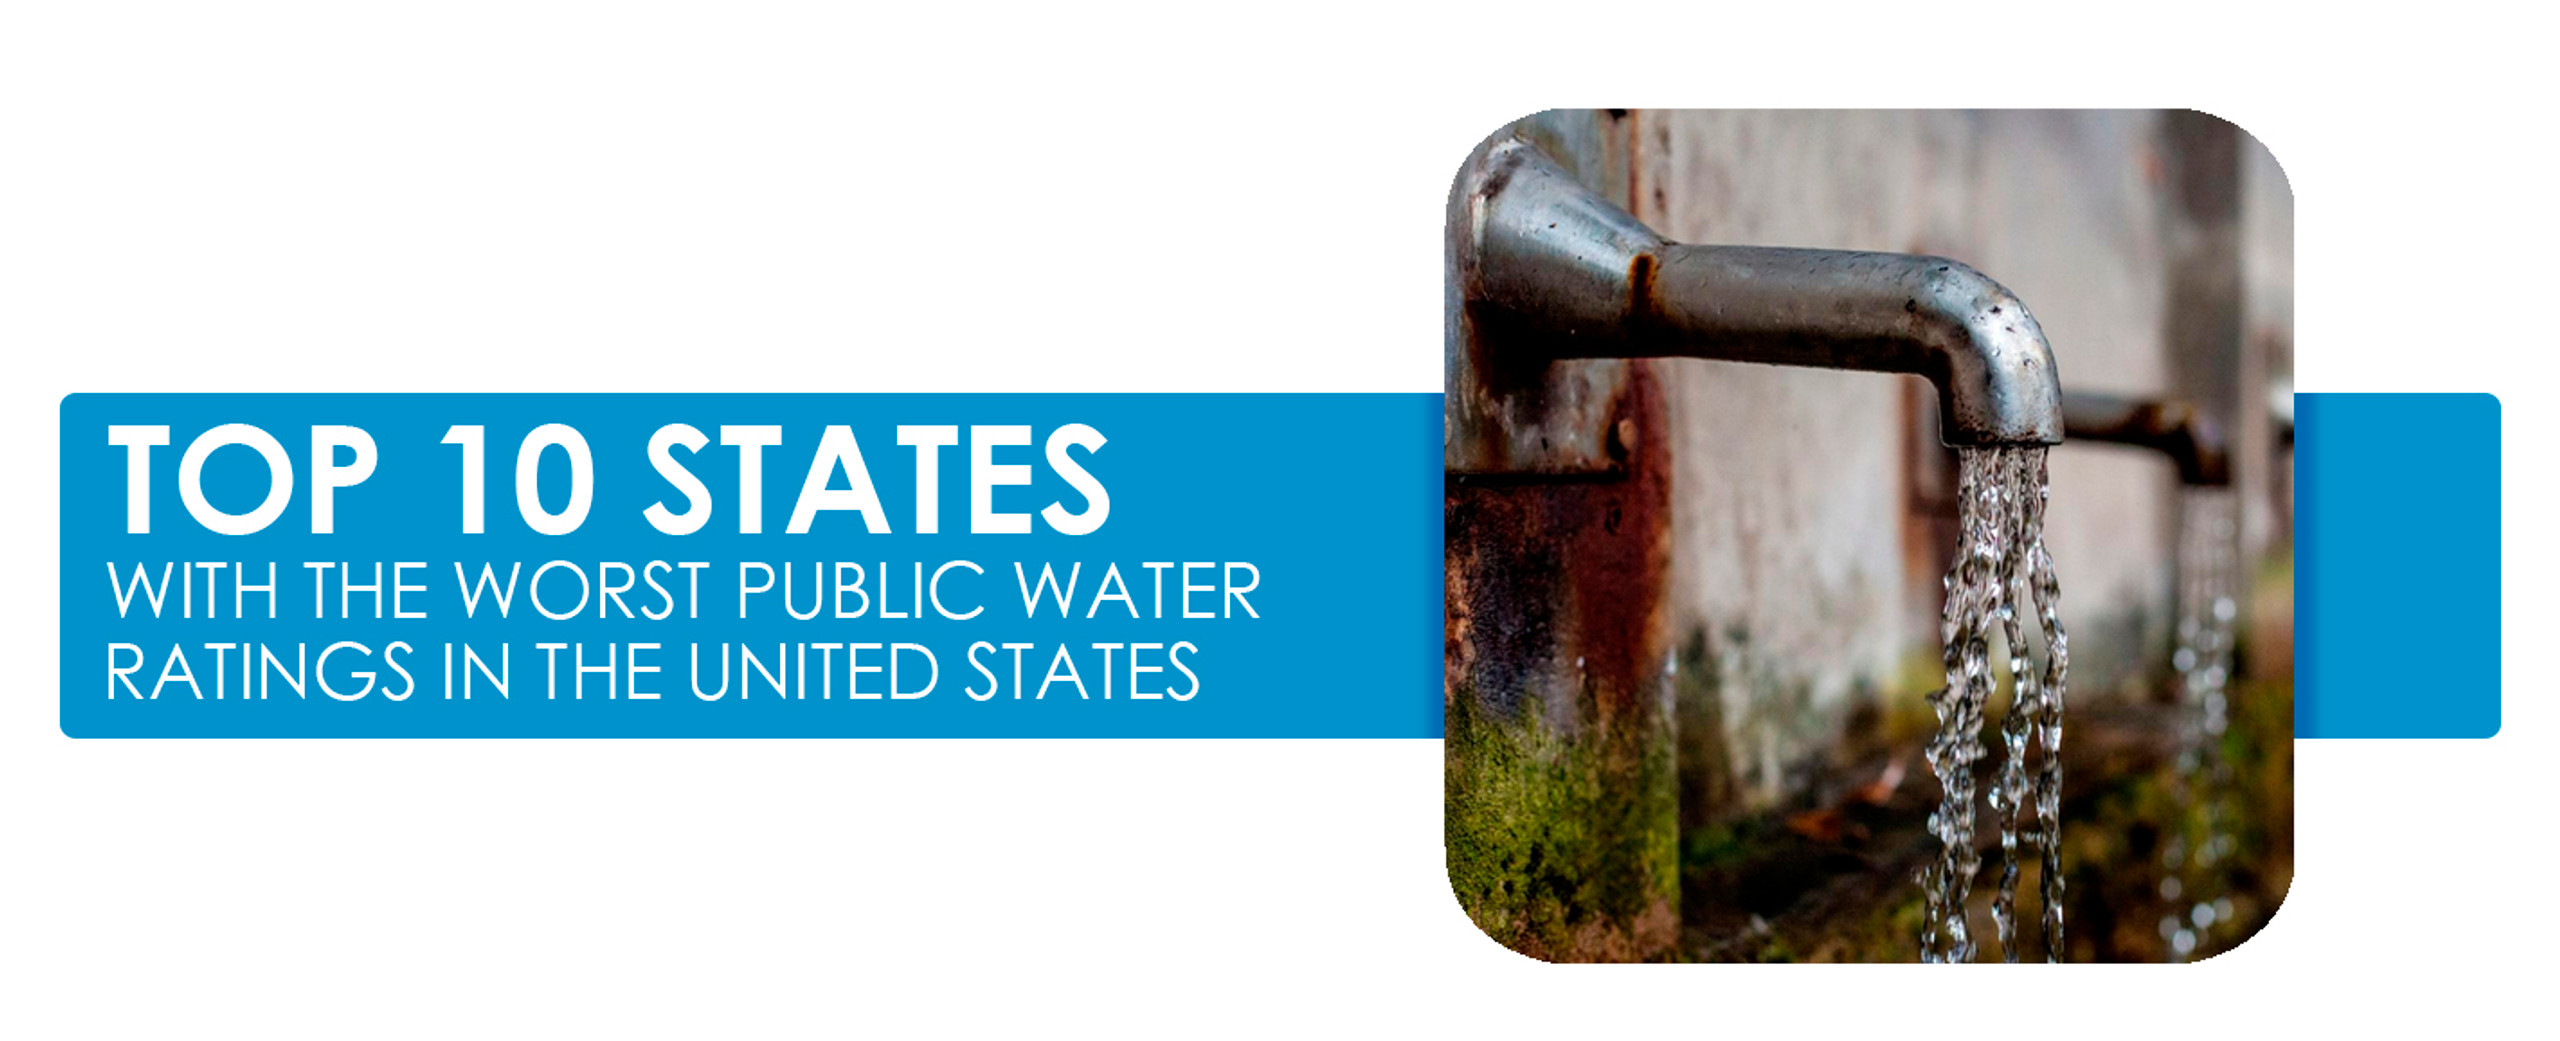 Top 10 States With the Worst Public Tap Water in the United States